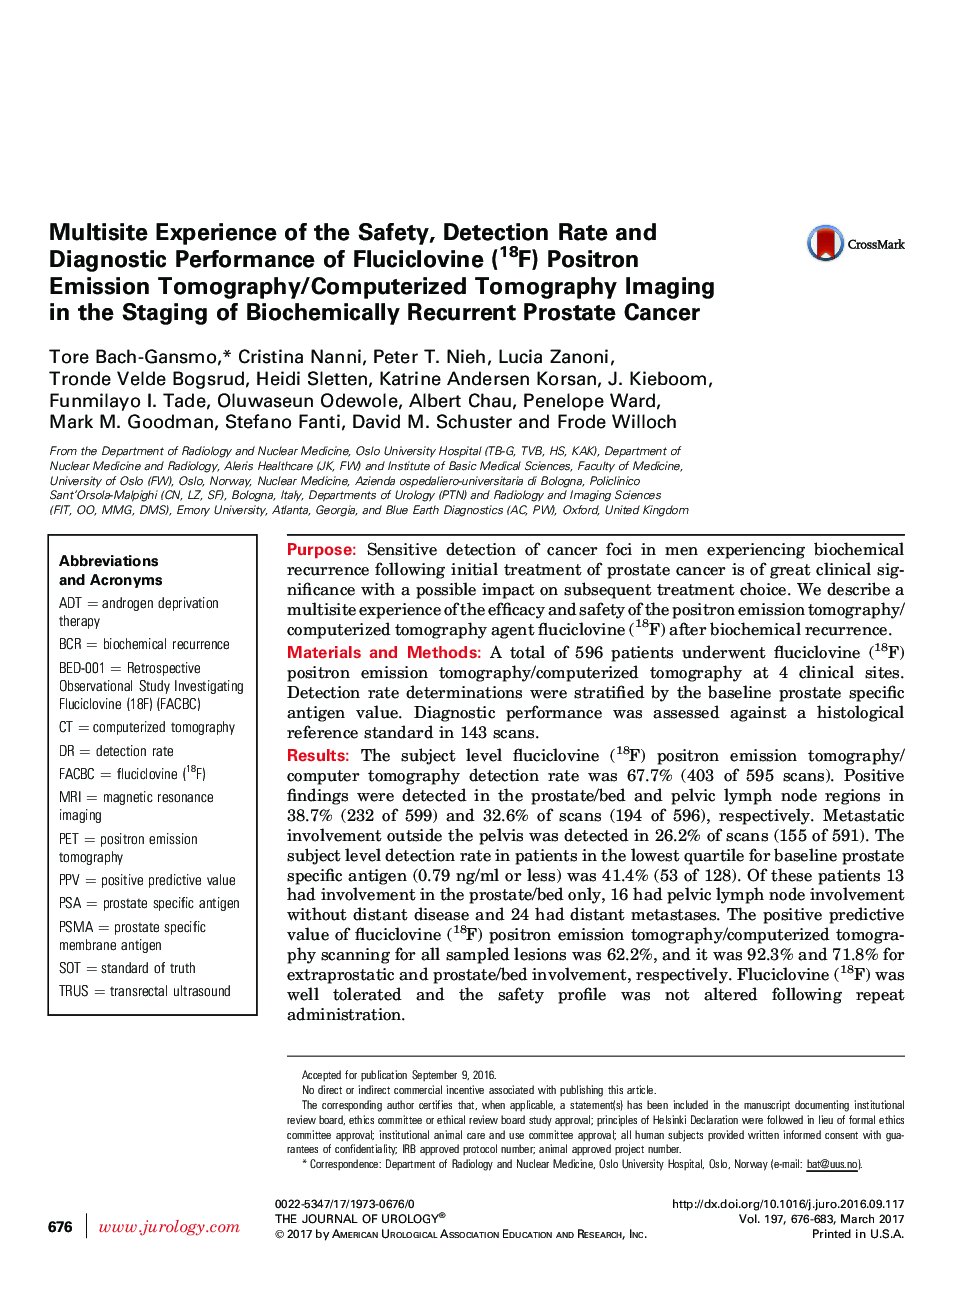 Multisite Experience of the Safety, Detection Rate and Diagnostic Performance of Fluciclovine (18F) Positron Emission Tomography/Computerized Tomography Imaging in the Staging of Biochemically Recurrent Prostate Cancer